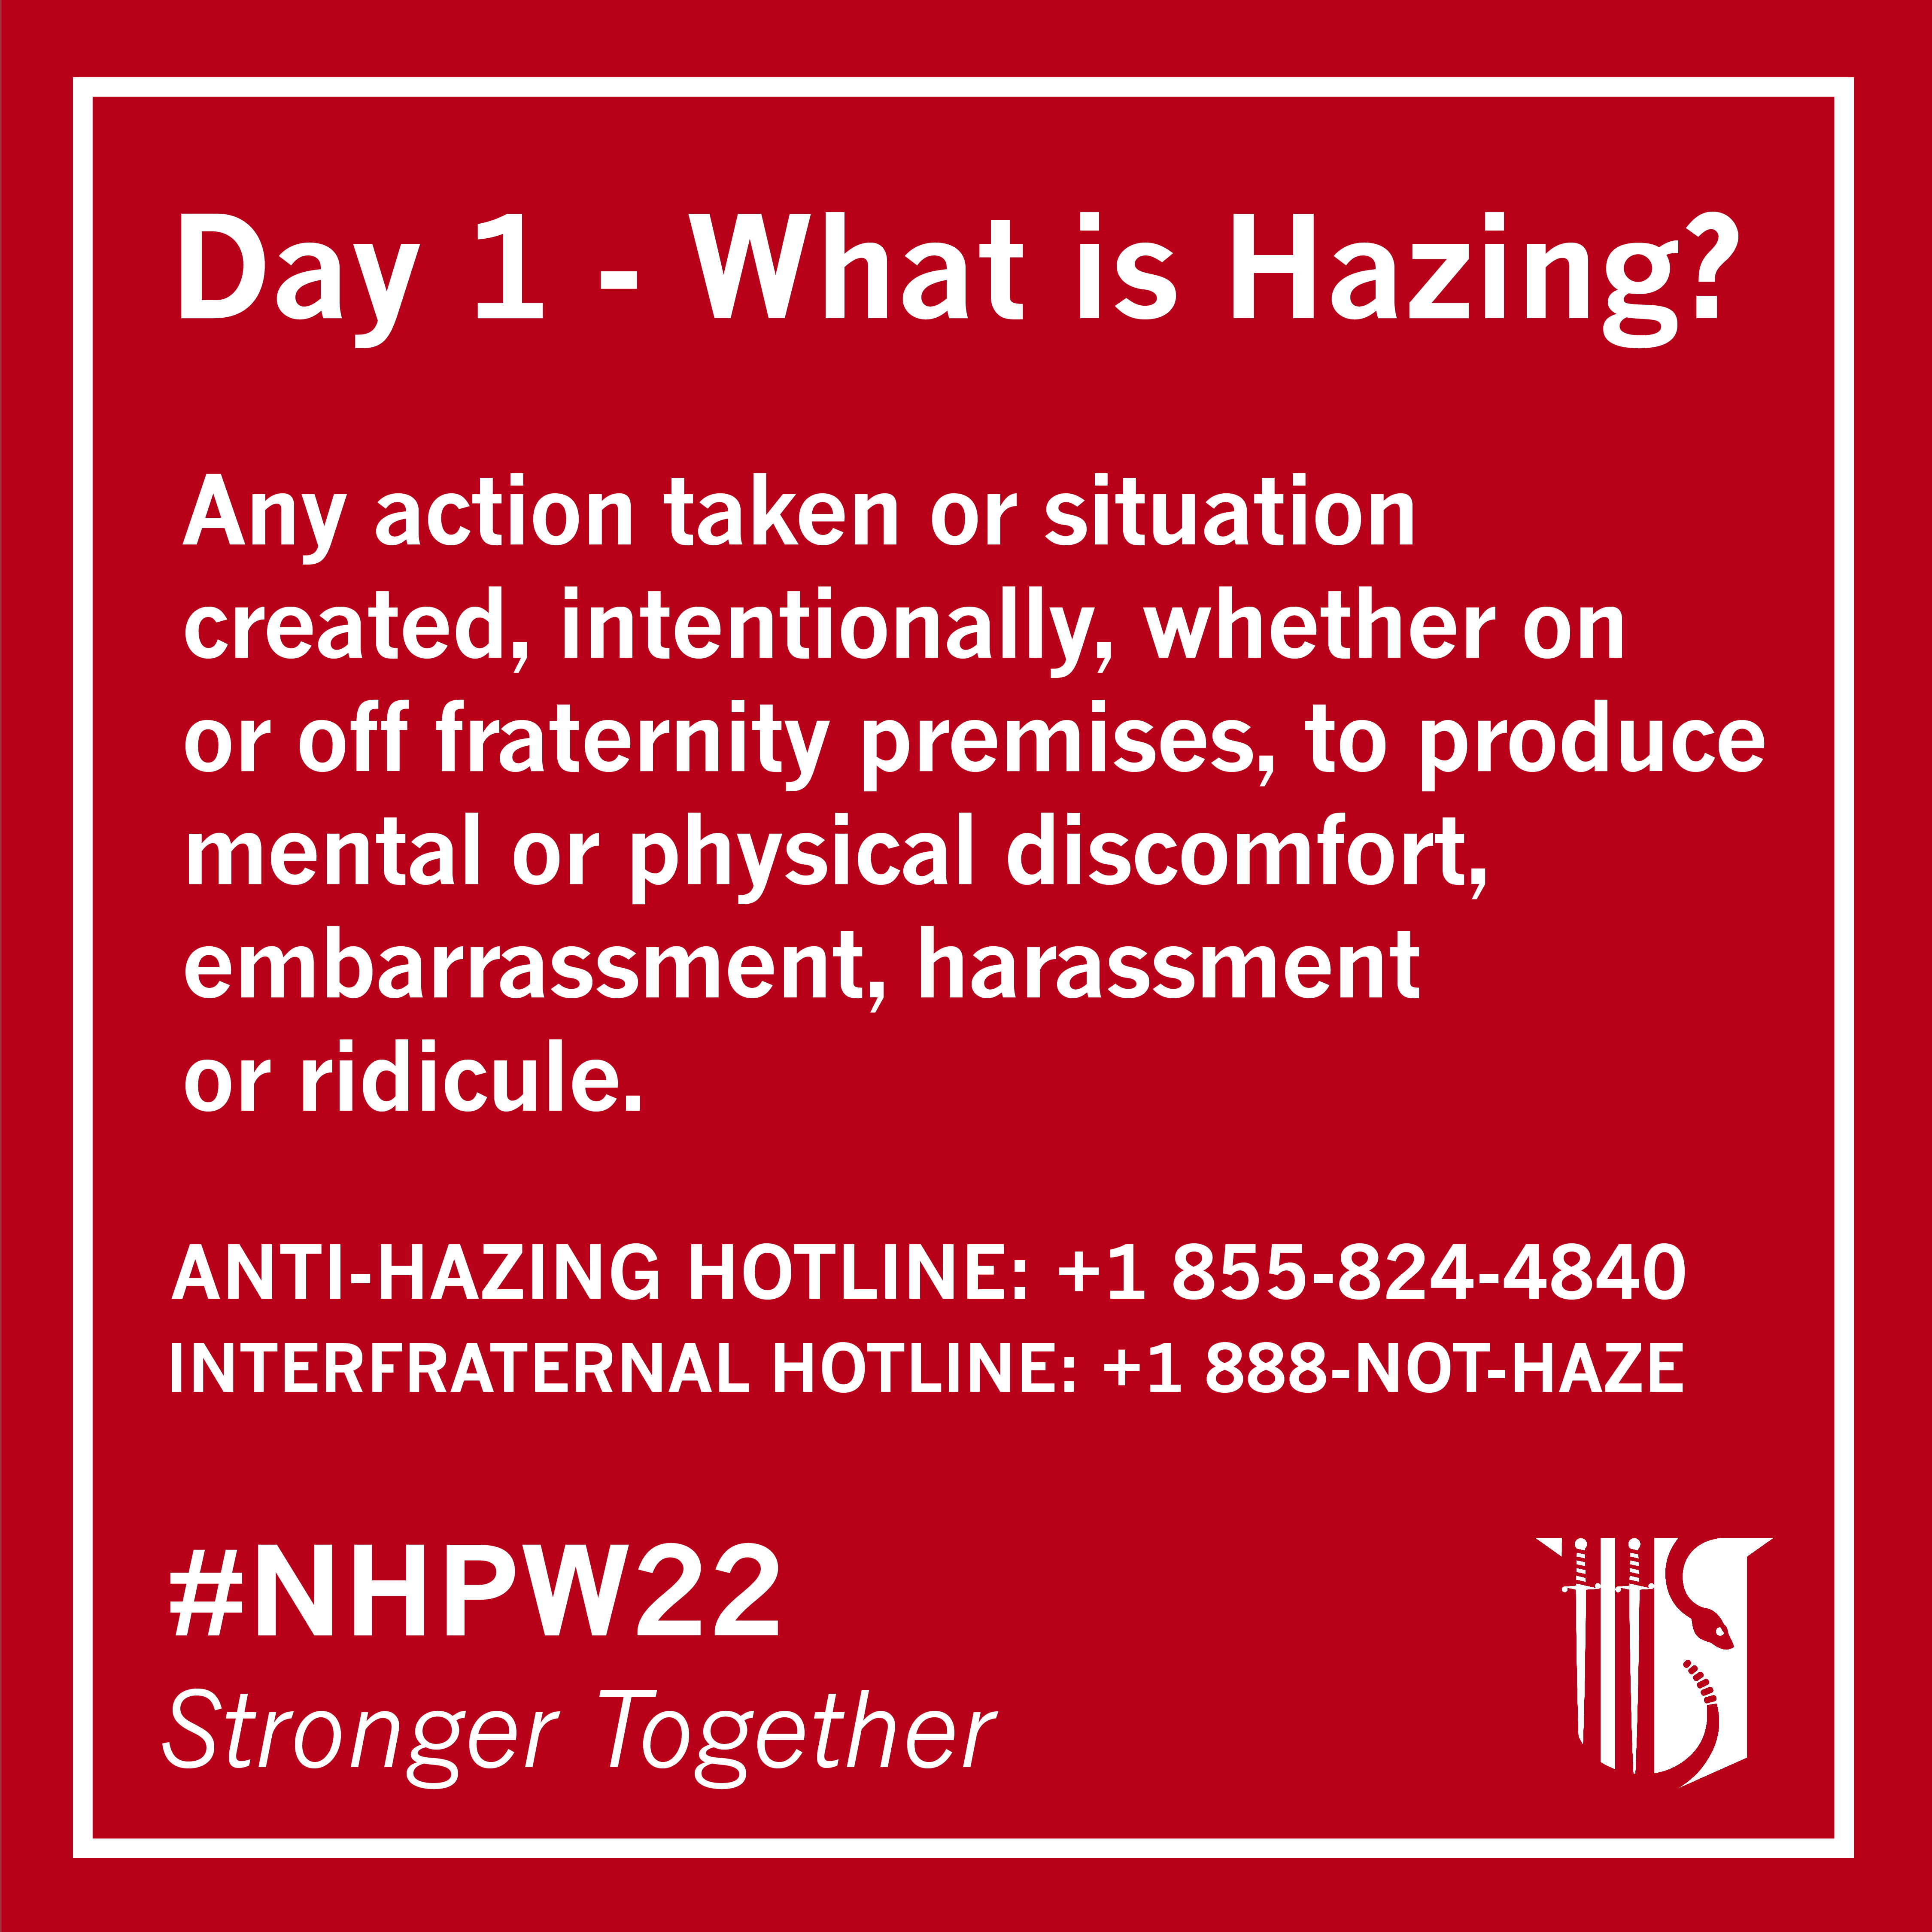 Day 1, What is Hazing?